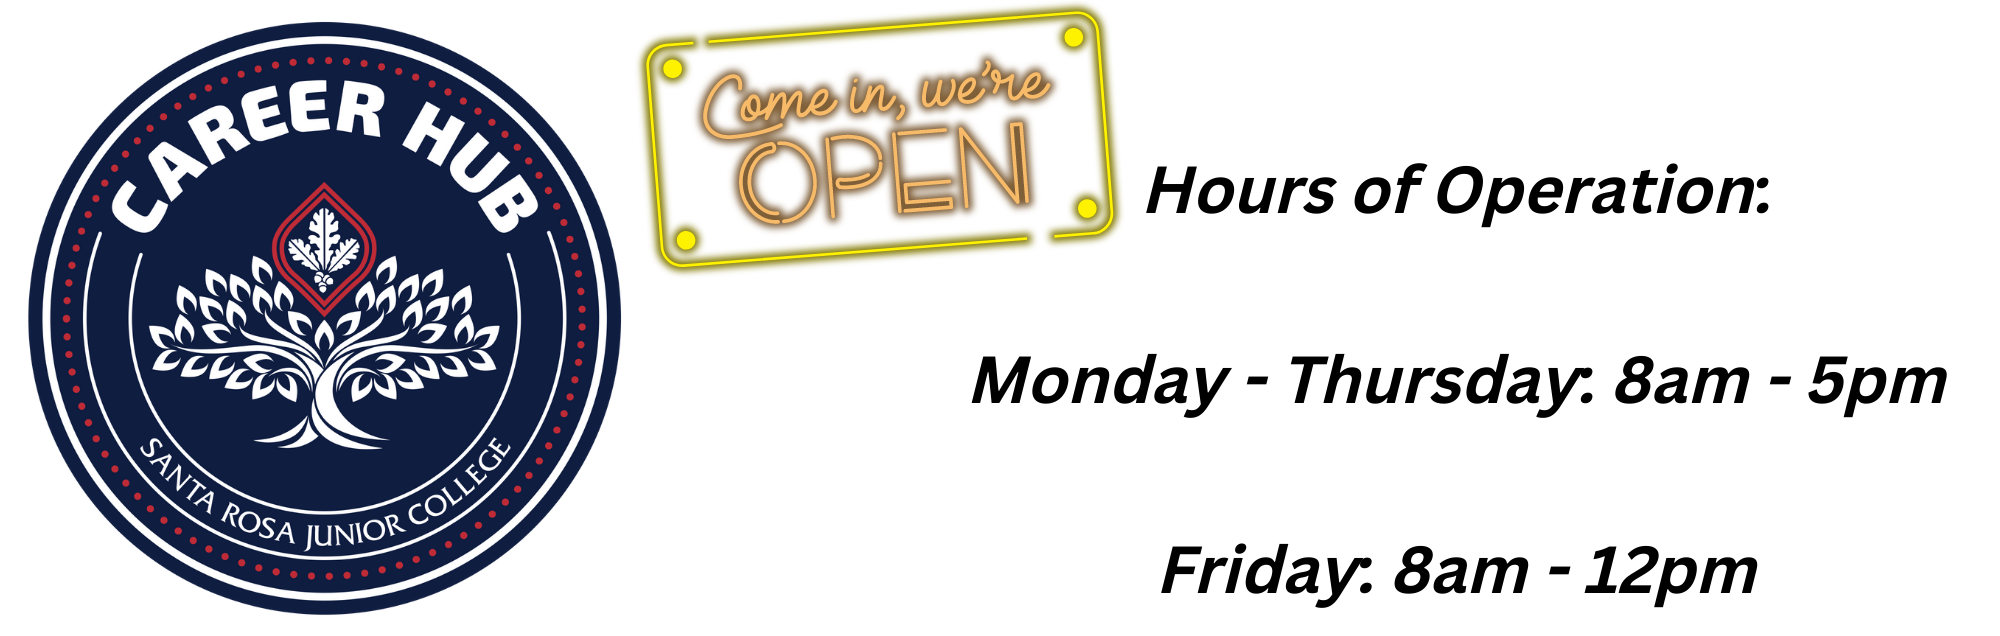 Career Hub Hours of Operation Monday-Thursday 8am to 5pm and Friday 8am to Noon